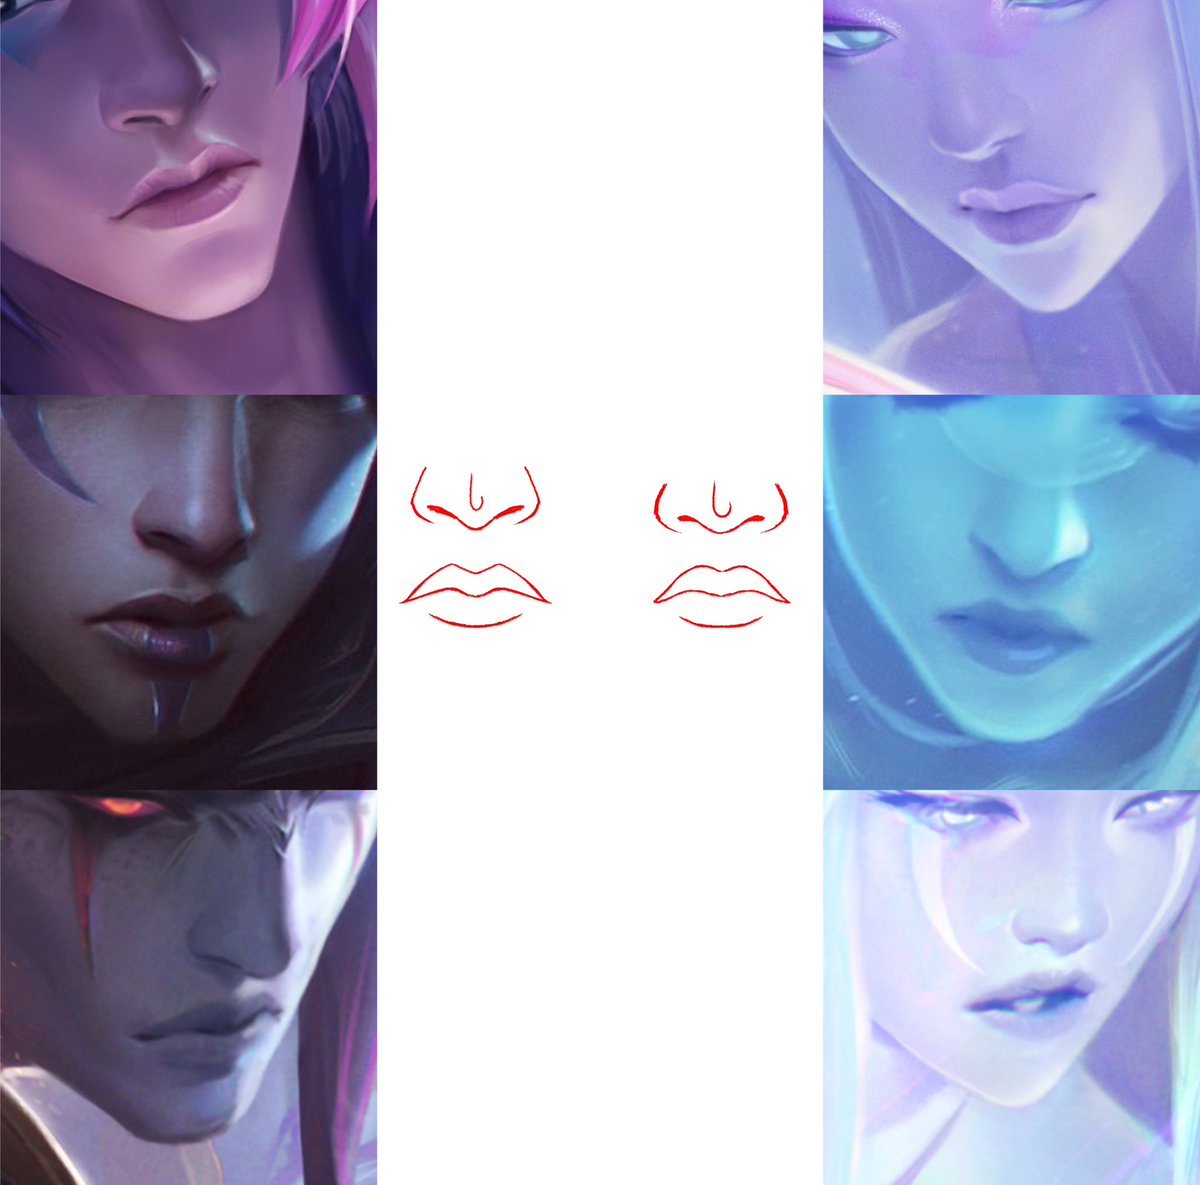 shoutout to alune and phel’s lip/ nose shape + how it makes them look kinda like they’re always saying “ew,” gotta be one of my favourite genders